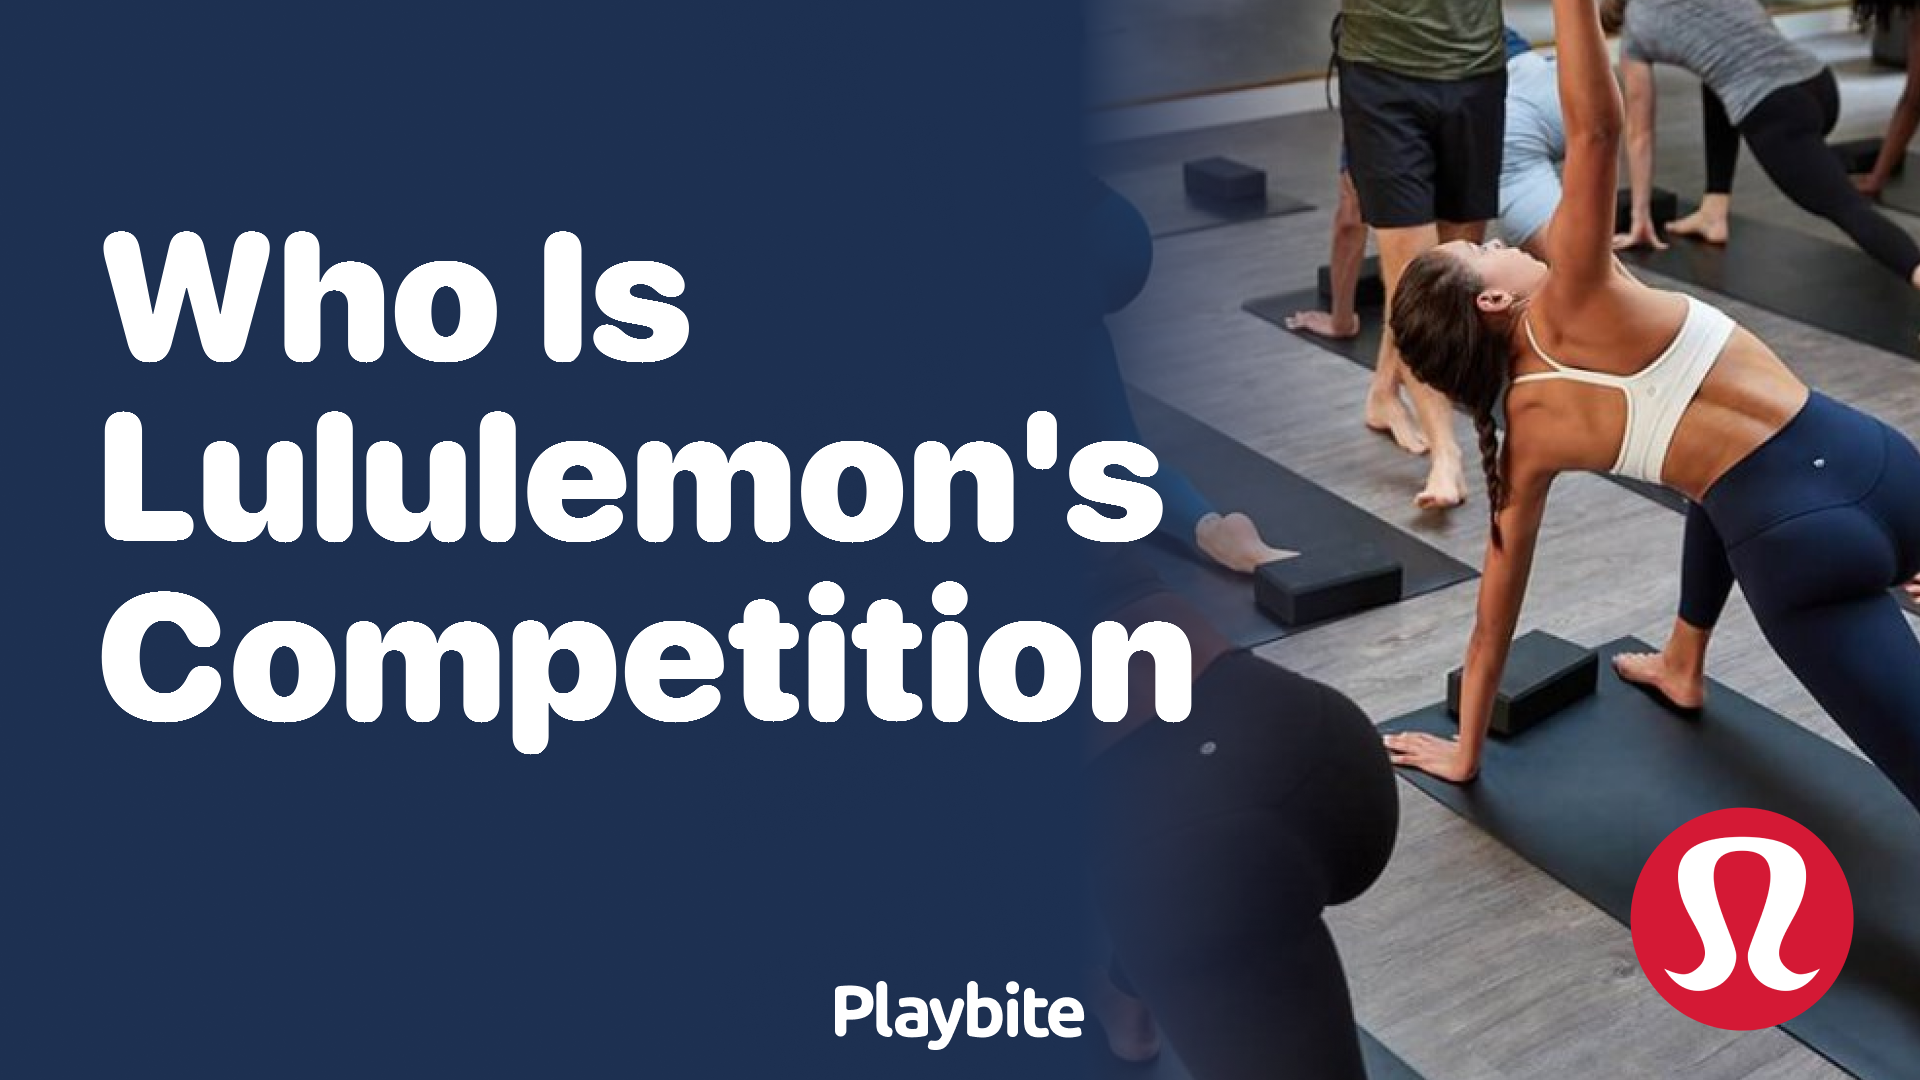 How Strong Are the Competitive Forces Confronting Lululemon? - Playbite